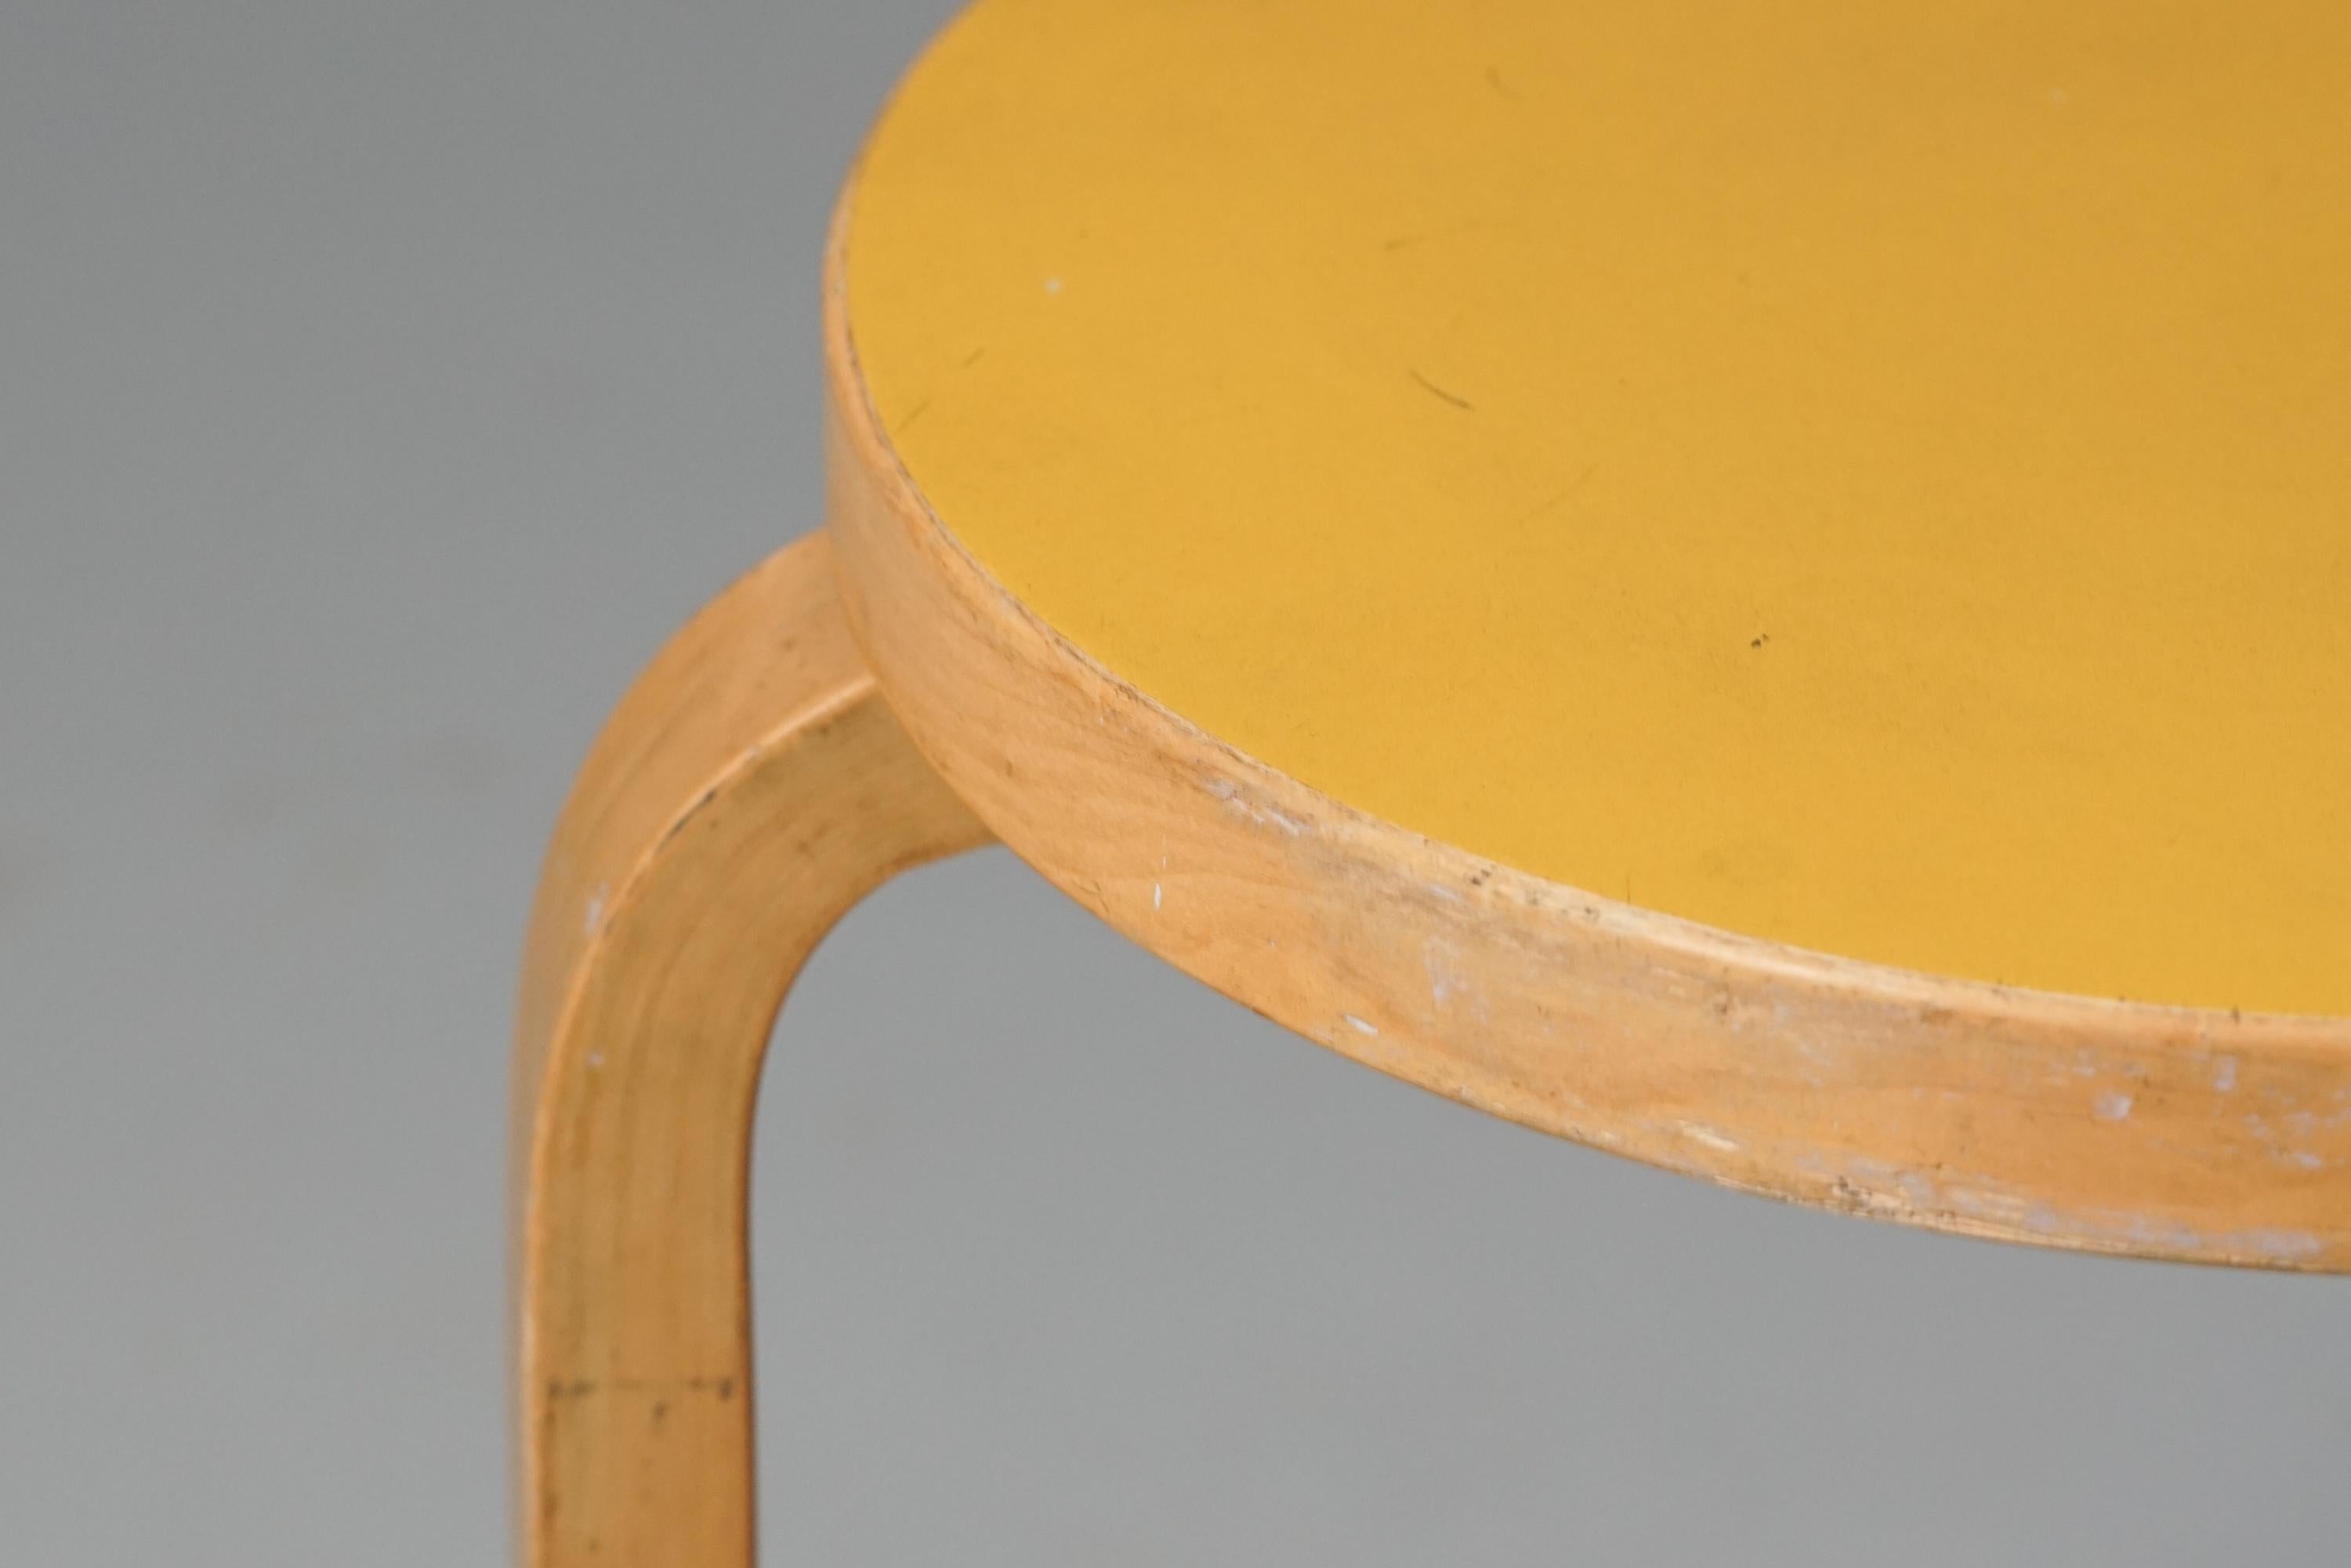 Model 60 Stool, designed by Alvar Aalto, manufactured by Artek, 1950/1960s. Birch frame, rare color linoleum. Good vintage condition, patina and minor wear consistent with age and use. 

Alvar Aalto (1898-1976) is probably the most famous Finnish